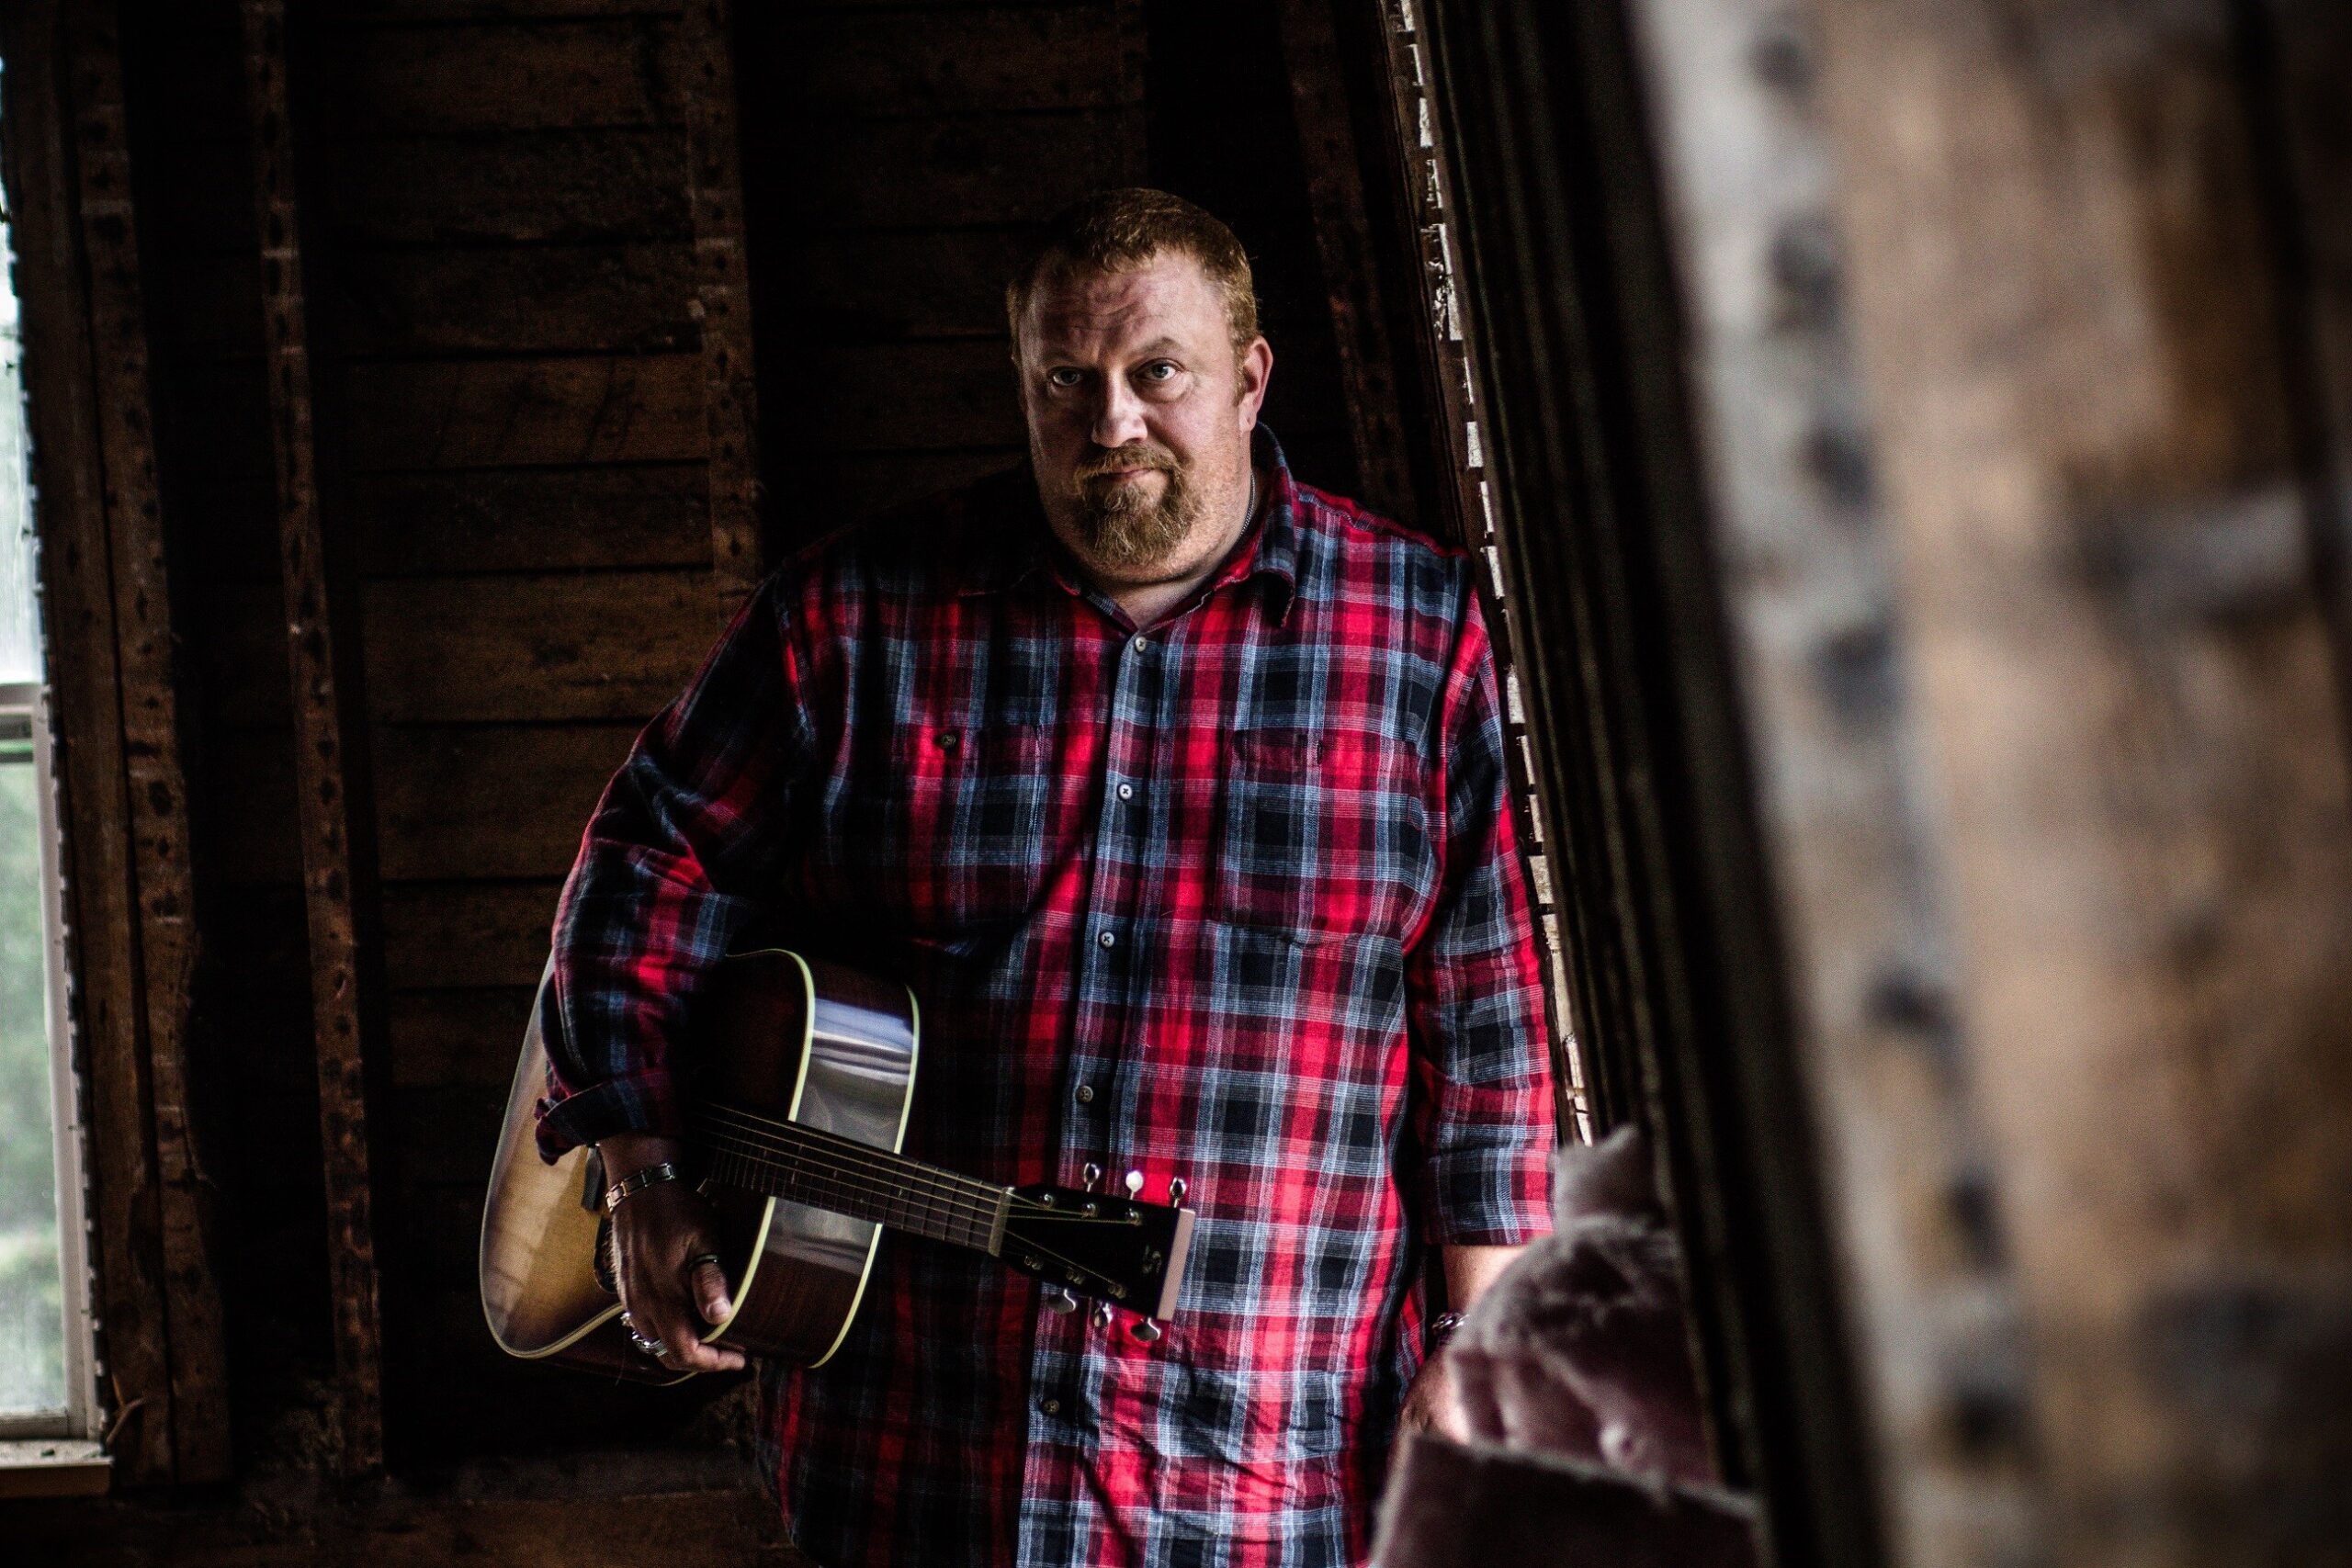 J.P. Cormier wearing a read plaid shirt with guitar under his arm. Background is an old barn loft